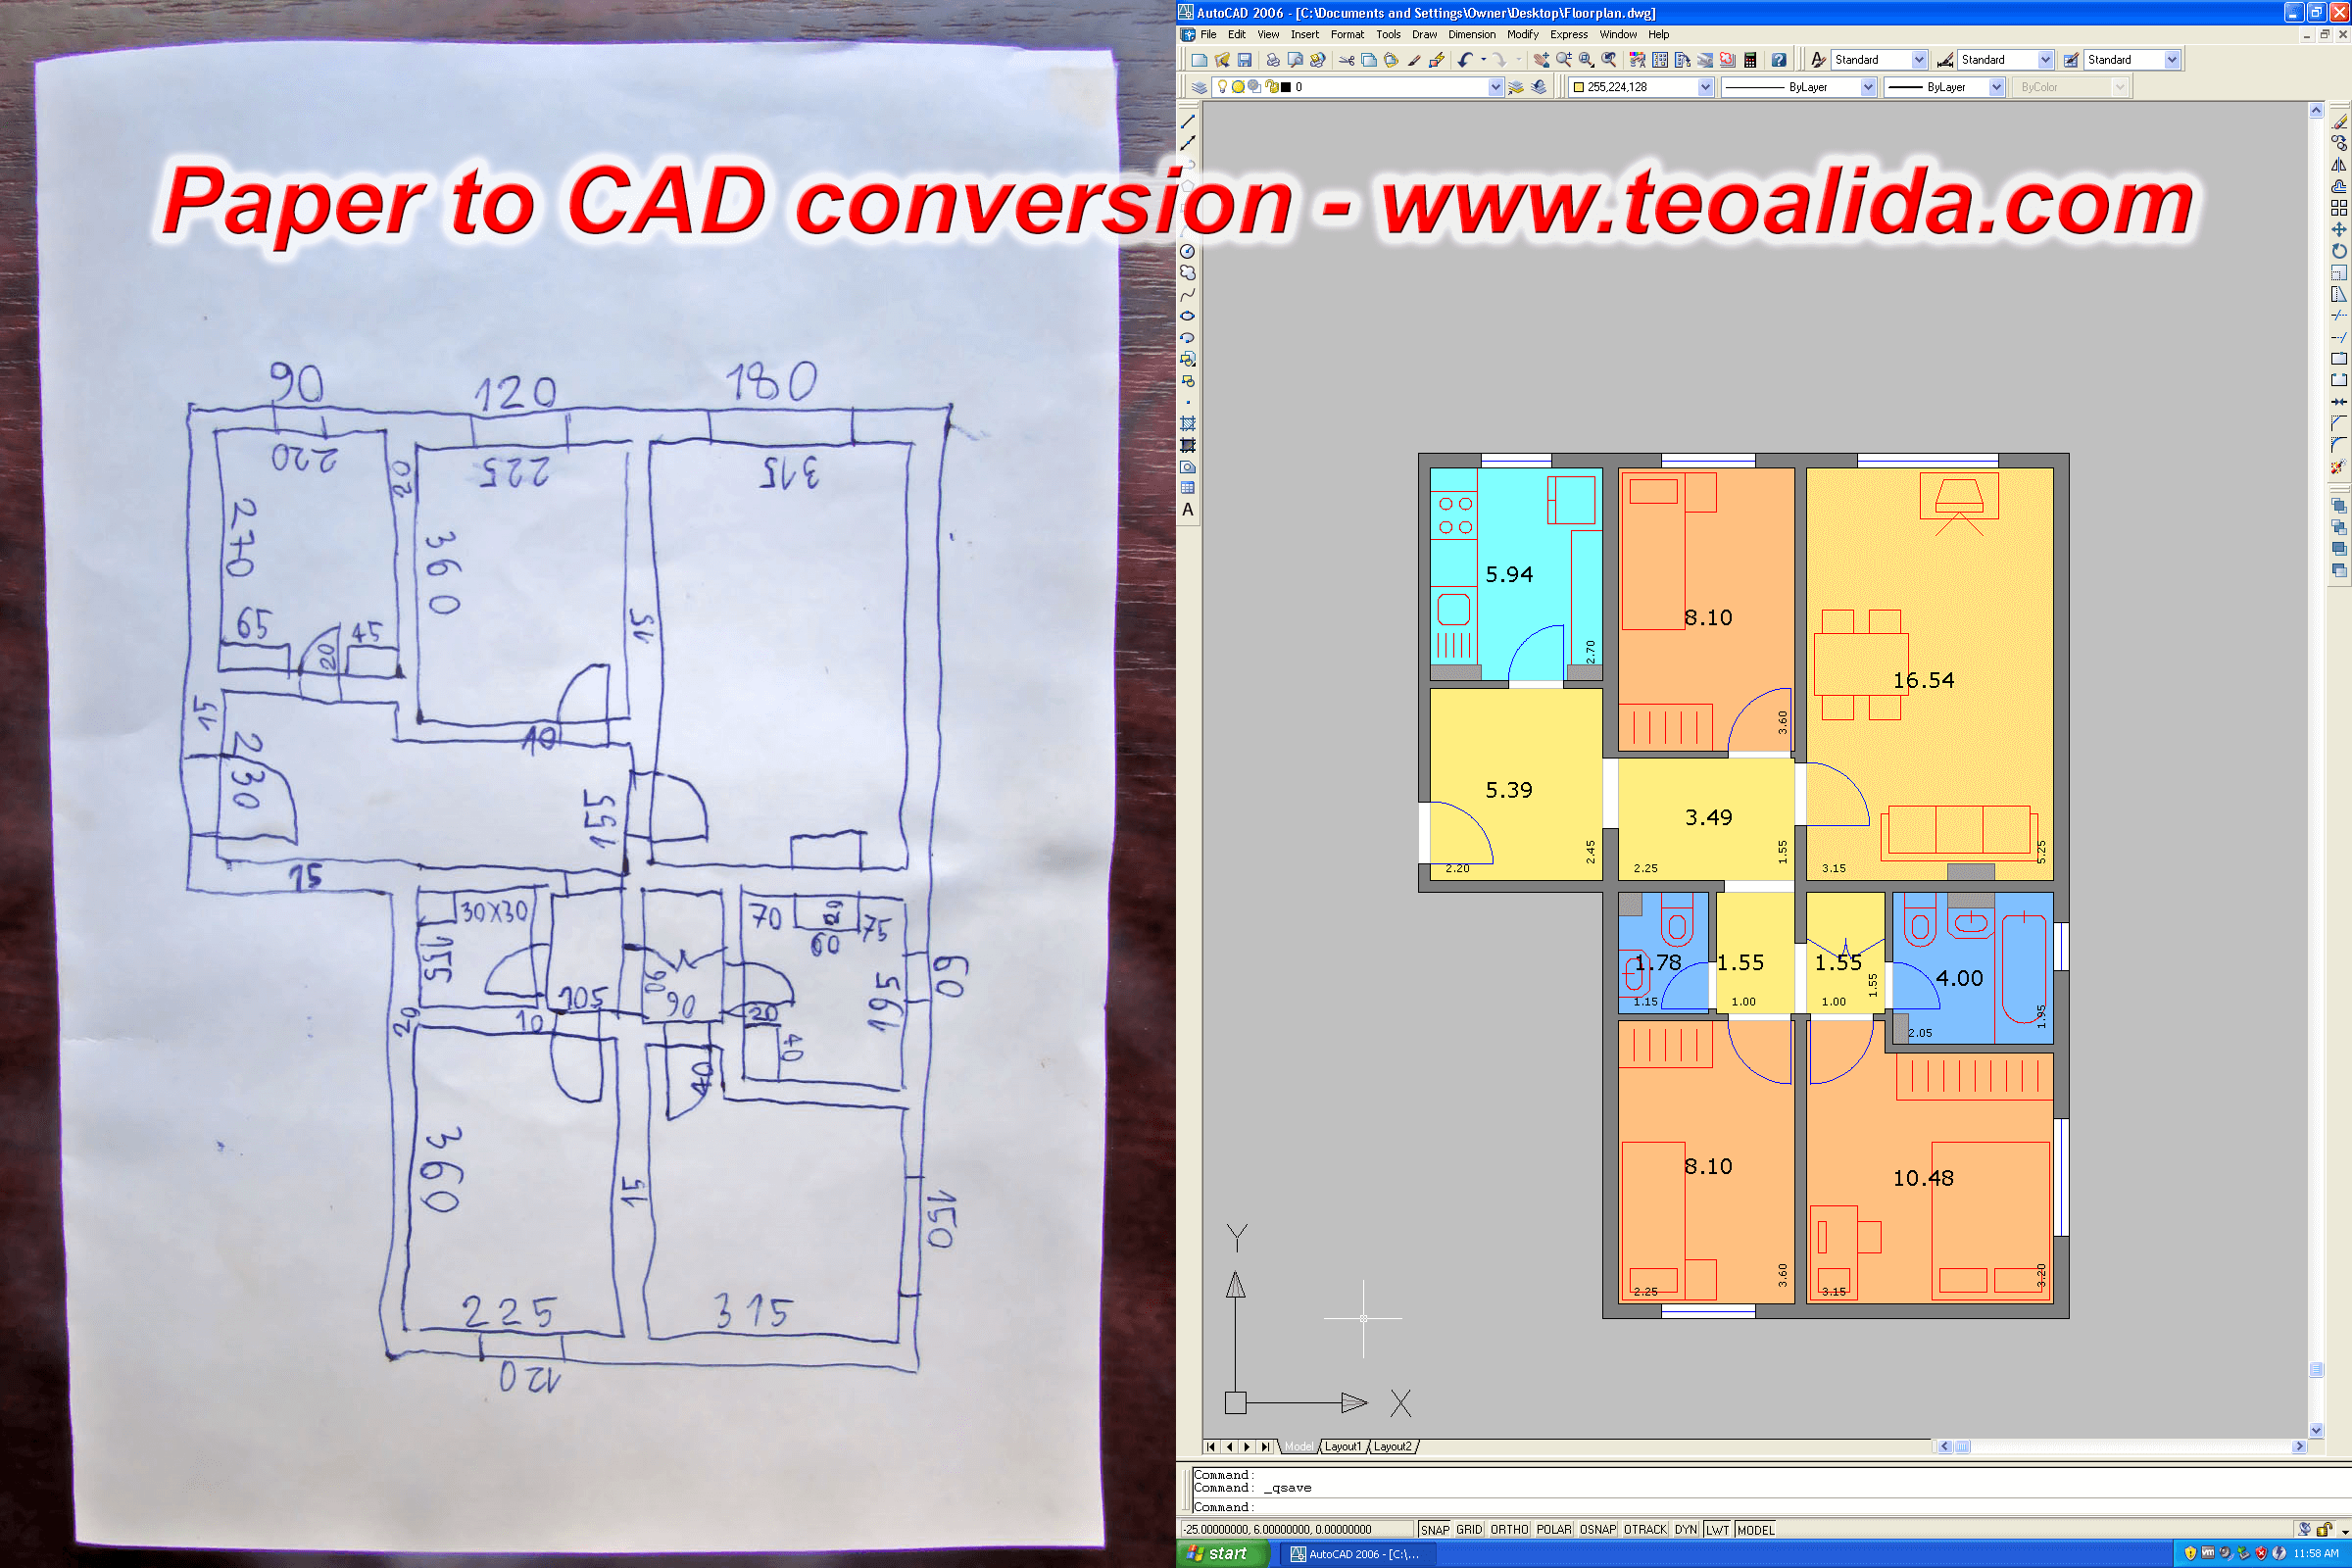 Paper to CAD conversion